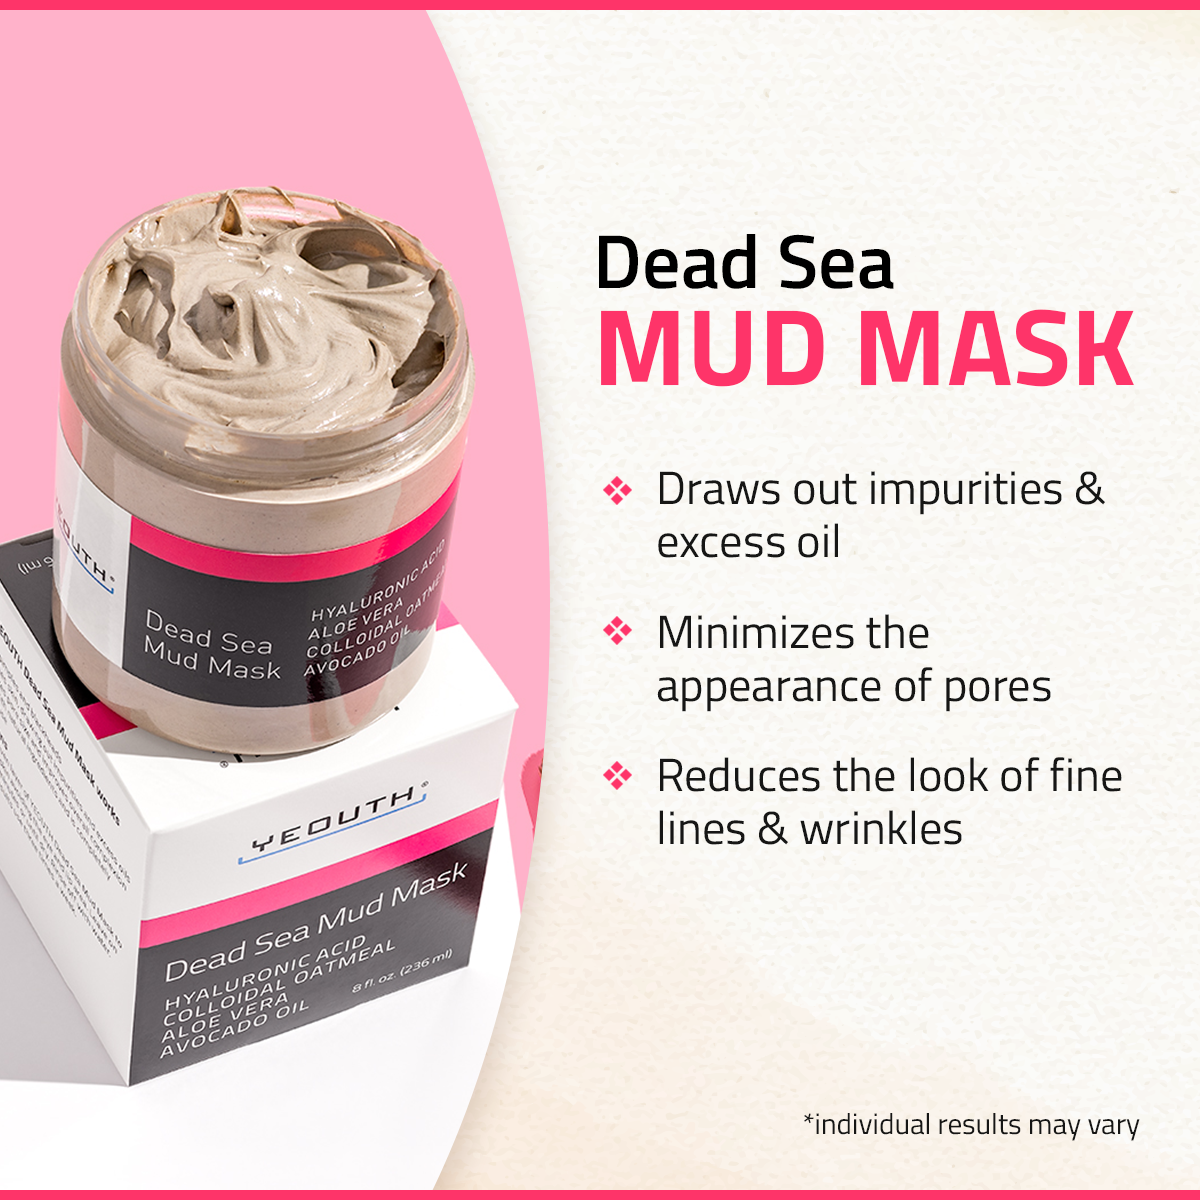 Dead Sea Mud Masks for face with Hyaluronic Acid, Face Masks Skincare Clay Mud for Pore, Wrinkles, Acne & Dark Spots, Anti Aging Facial & Beauty Face Masks for Women & Men by YEOUTH 8oz - image 2 of 7